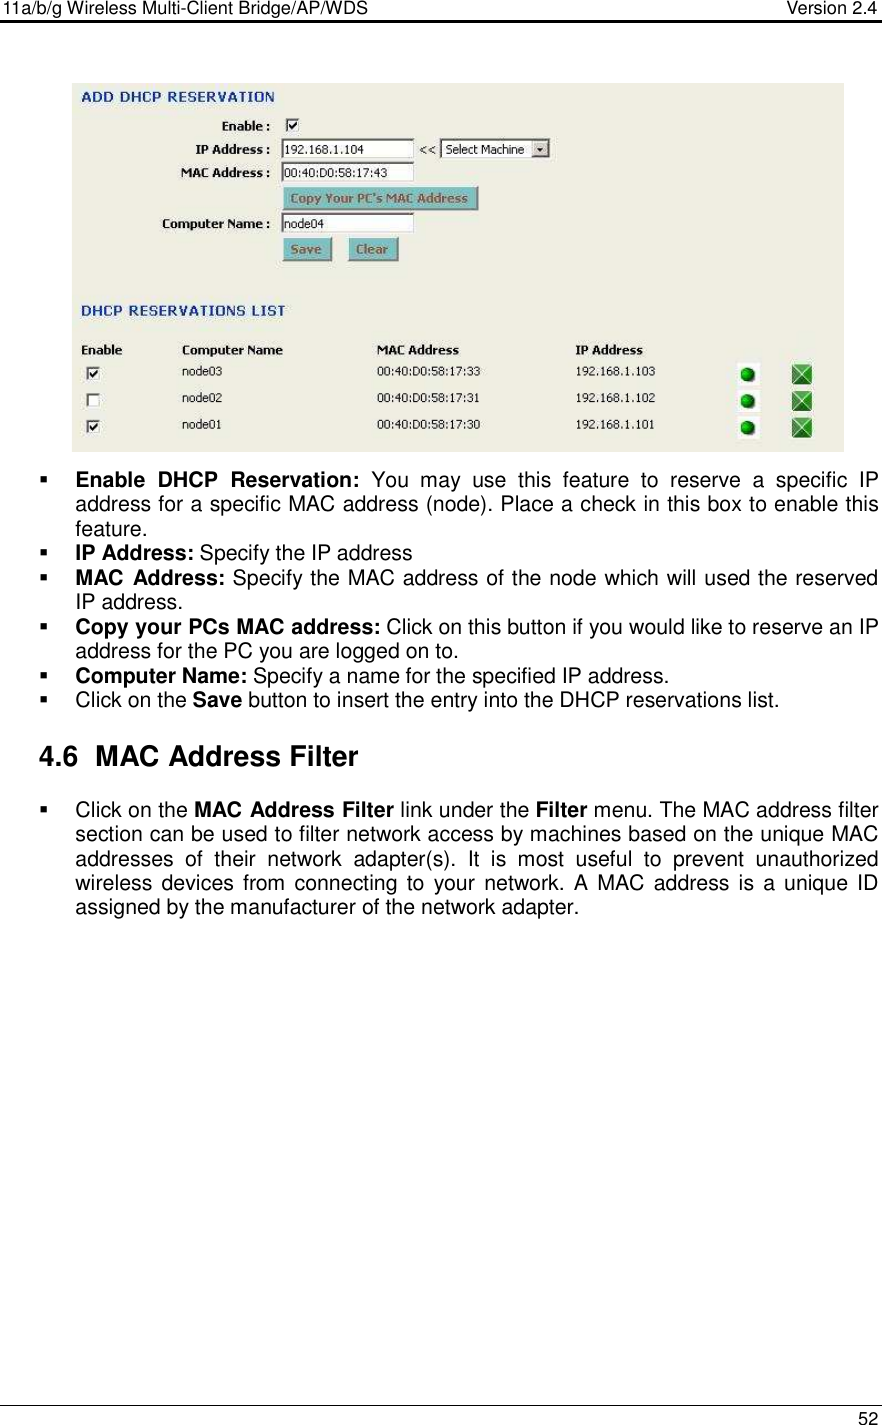 11a/b/g Wireless Multi-Client Bridge/AP/WDS                                  Version 2.4    52                   Enable  DHCP  Reservation:  You  may  use  this  feature  to  reserve  a  specific  IP address for a specific MAC address (node). Place a check in this box to enable this feature.   IP Address: Specify the IP address  MAC  Address: Specify the MAC address of the node which will used the reserved IP address.   Copy your PCs MAC address: Click on this button if you would like to reserve an IP address for the PC you are logged on to.  Computer Name: Specify a name for the specified IP address.   Click on the Save button to insert the entry into the DHCP reservations list.    4.6  MAC Address Filter   Click on the MAC Address Filter link under the Filter menu. The MAC address filter section can be used to filter network access by machines based on the unique MAC addresses  of  their  network  adapter(s).  It  is  most  useful  to  prevent  unauthorized wireless devices from connecting to  your  network.  A MAC  address is a unique ID assigned by the manufacturer of the network adapter.  